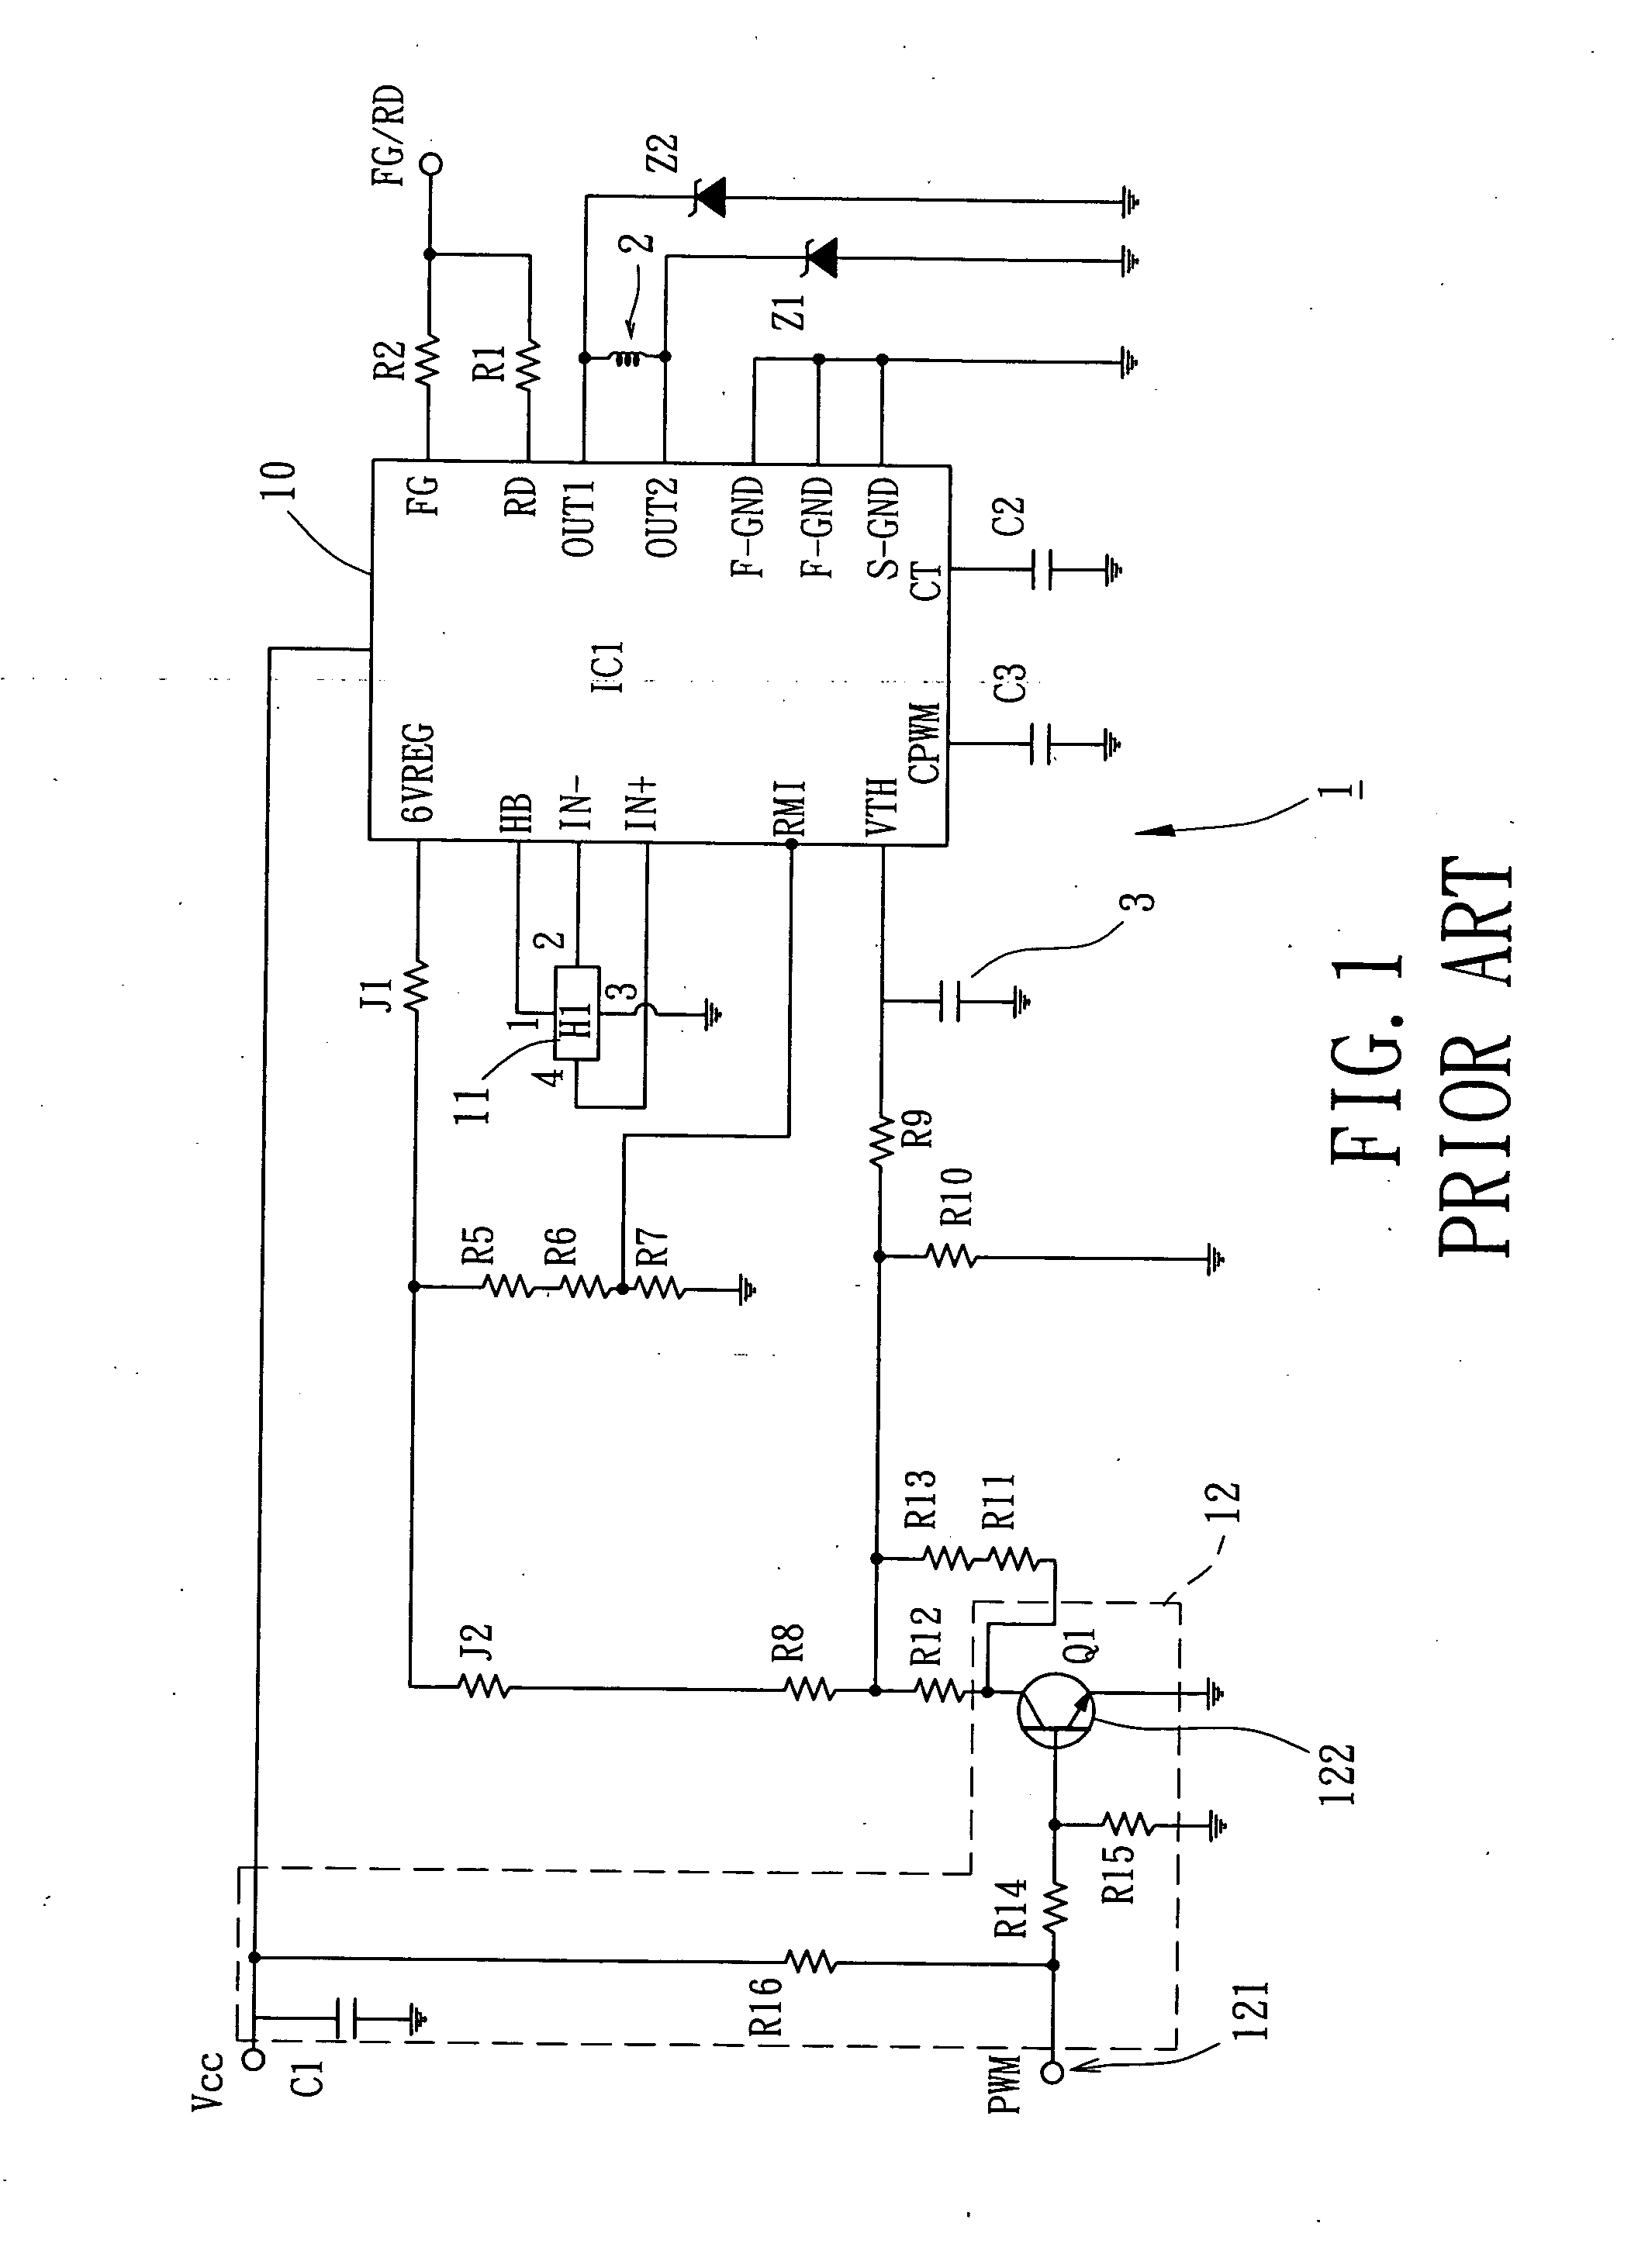 Frequency-variable pulse-width-modulation motor drive circuit capable of operating under different pwm frequencies